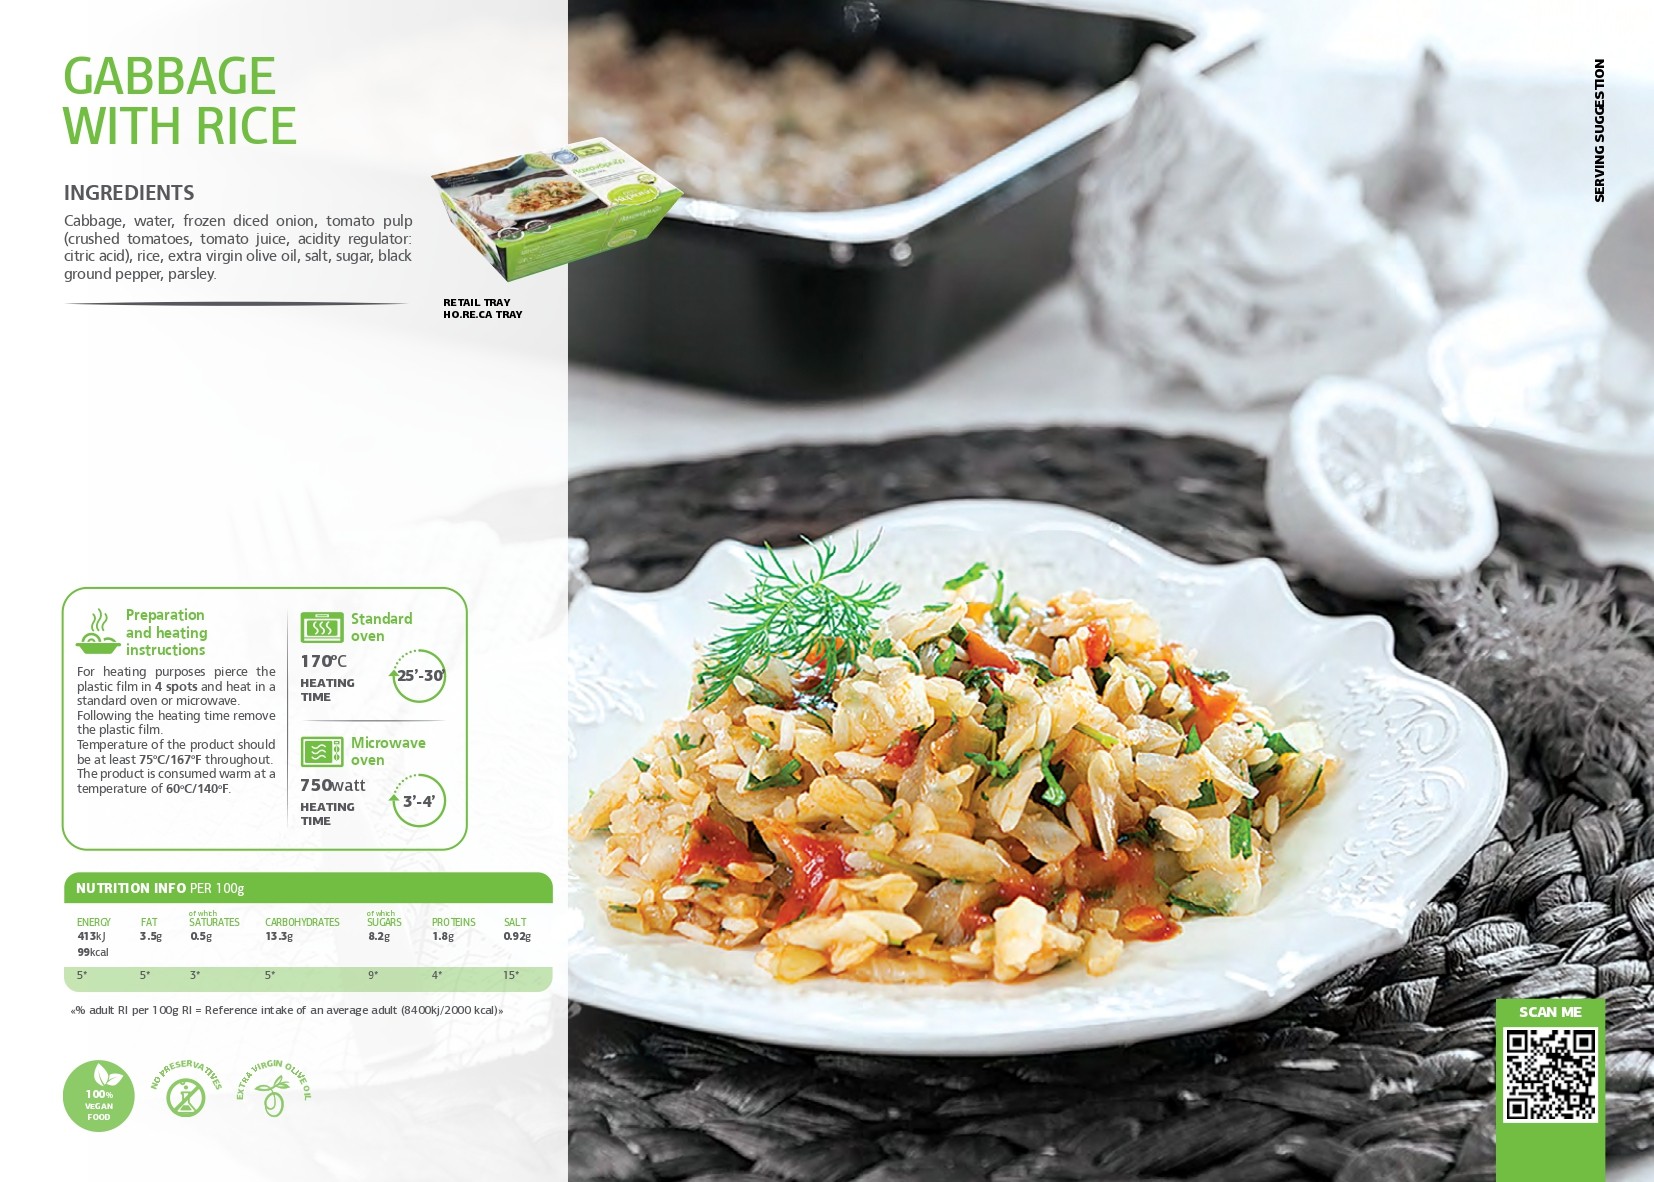 SK - Cabbage with rice pdf image